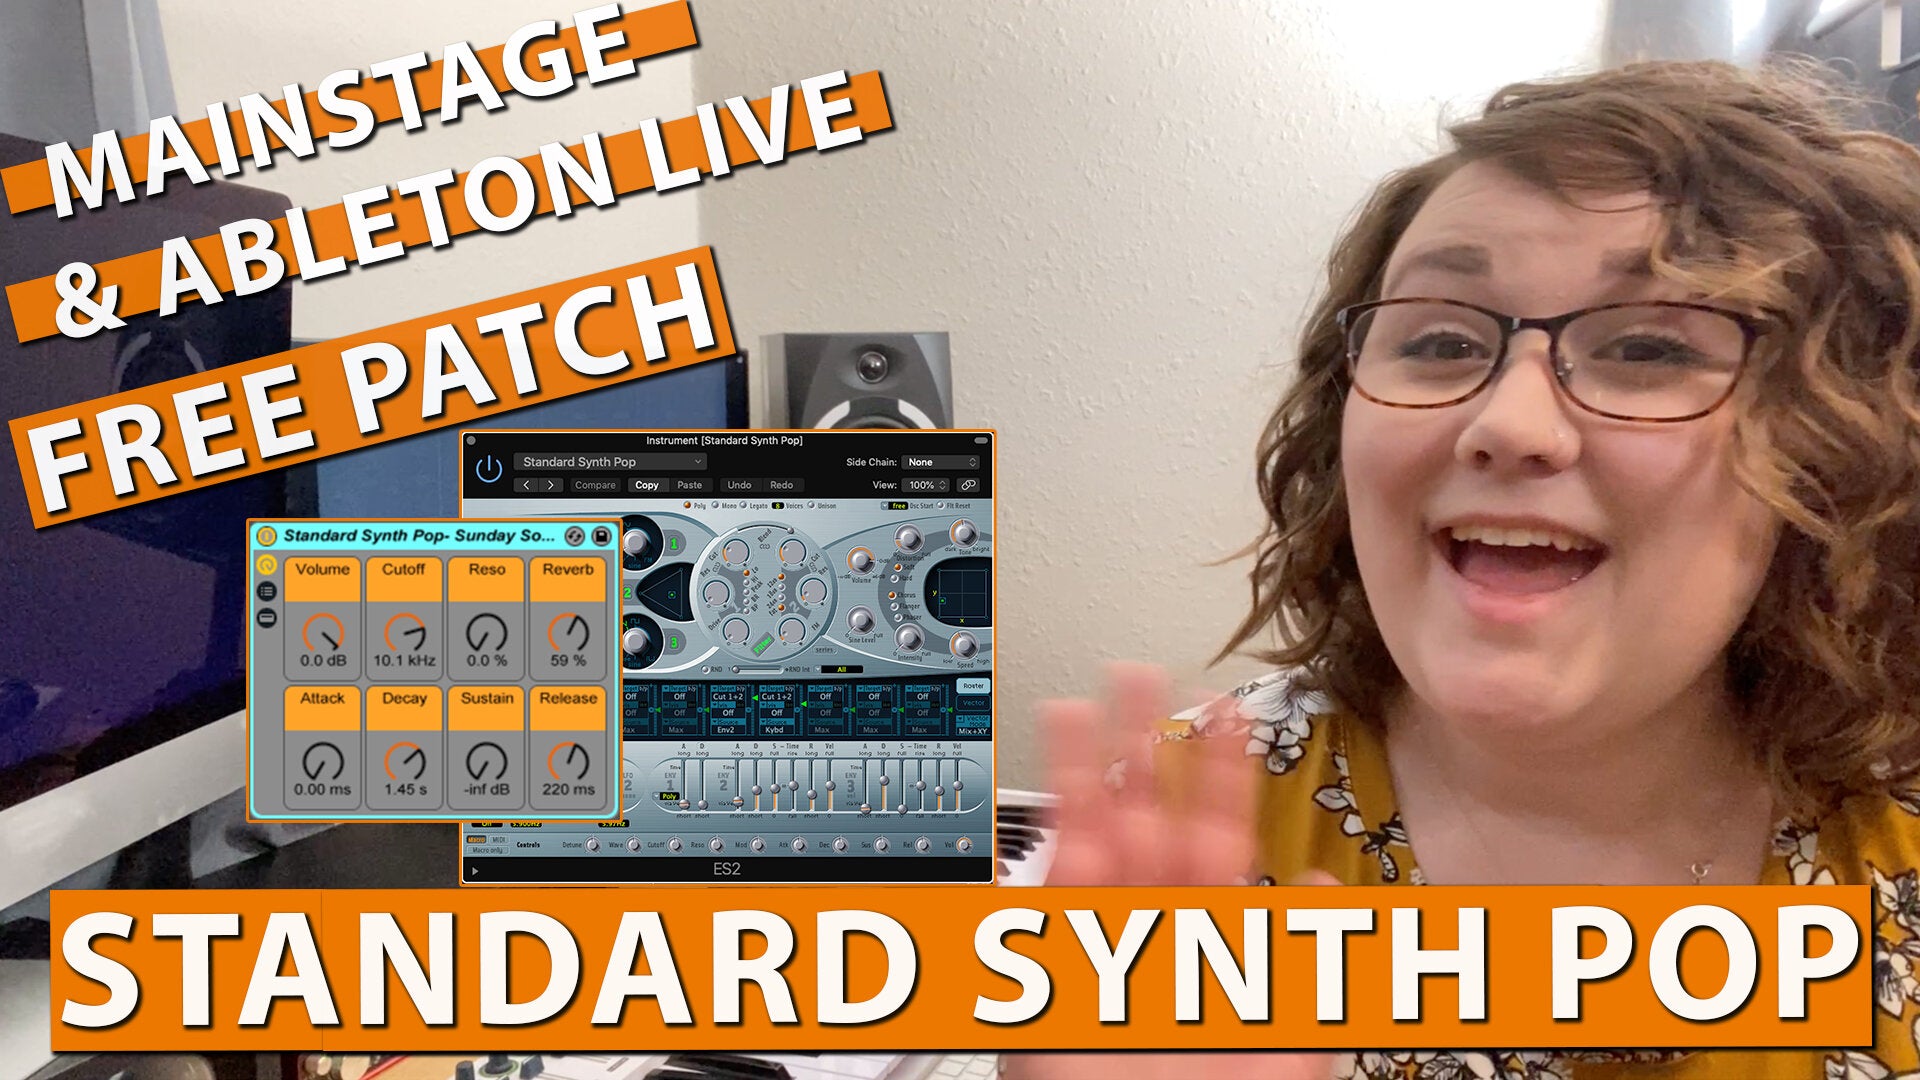 Free MainStage & Ableton Worship Patch! - Standard Synth Pop